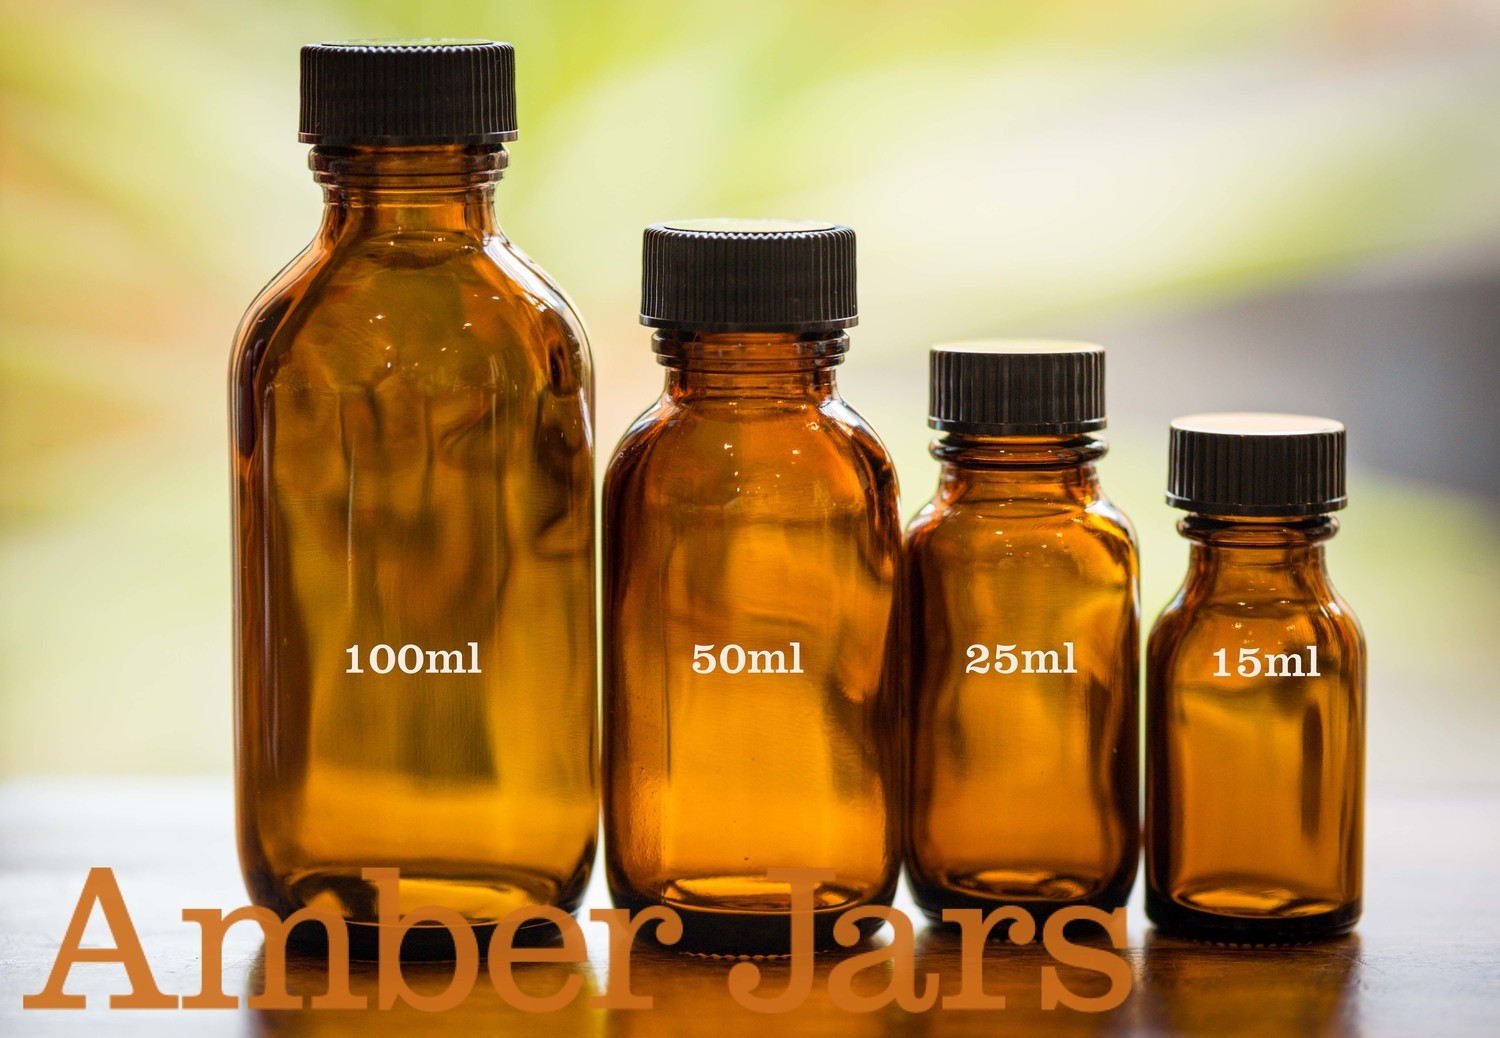 15ml Amber Glass Bottle with Black Cap - Aromatherapy, Homeopathy, Natural Medicine